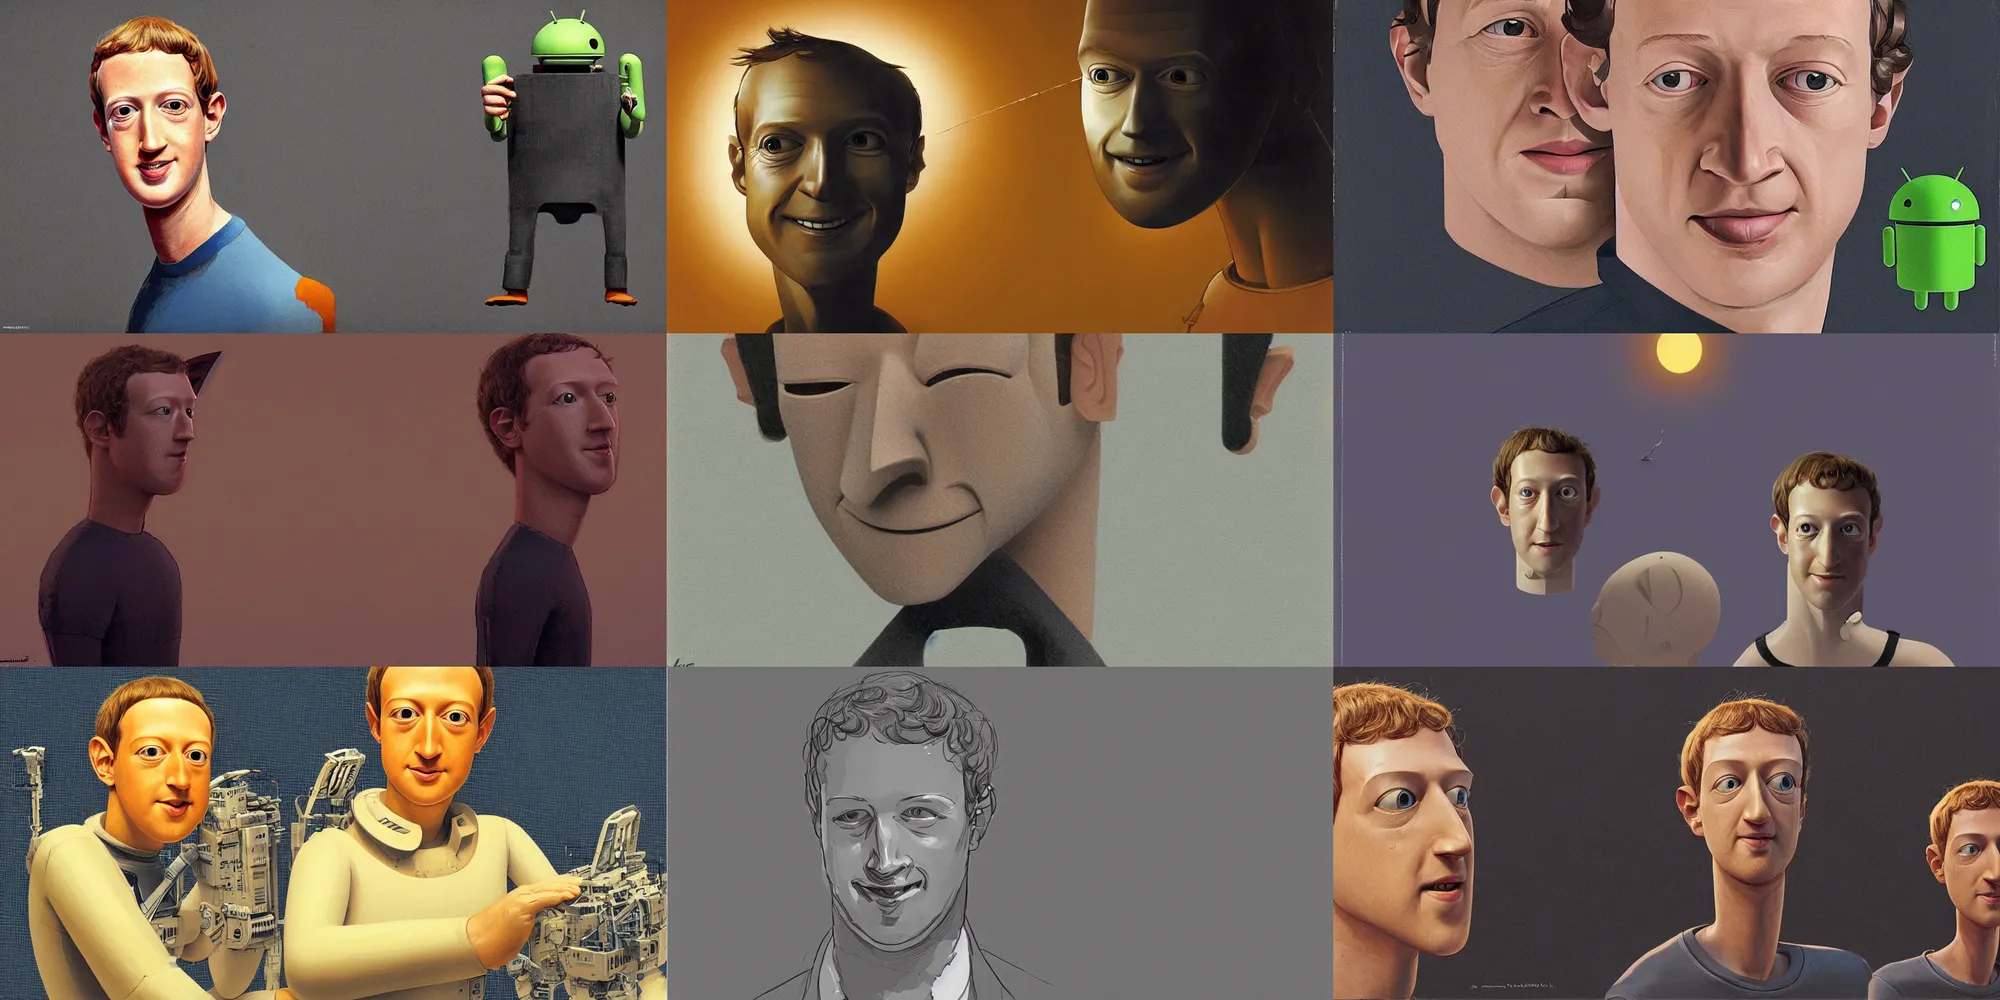 Prompt: Android Mark Zuckerberg bent in a weird angle trying to smile, Dan McPharlin, Ralph McQuarrie